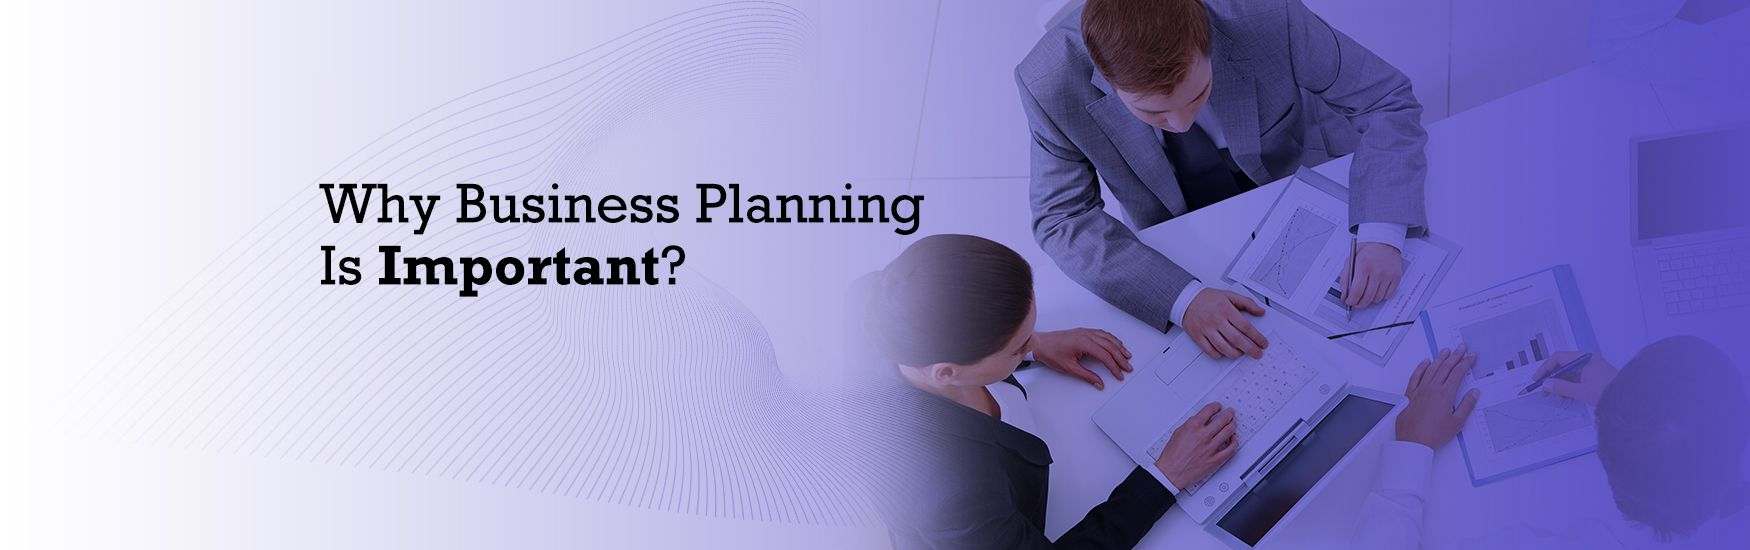 why business planning important